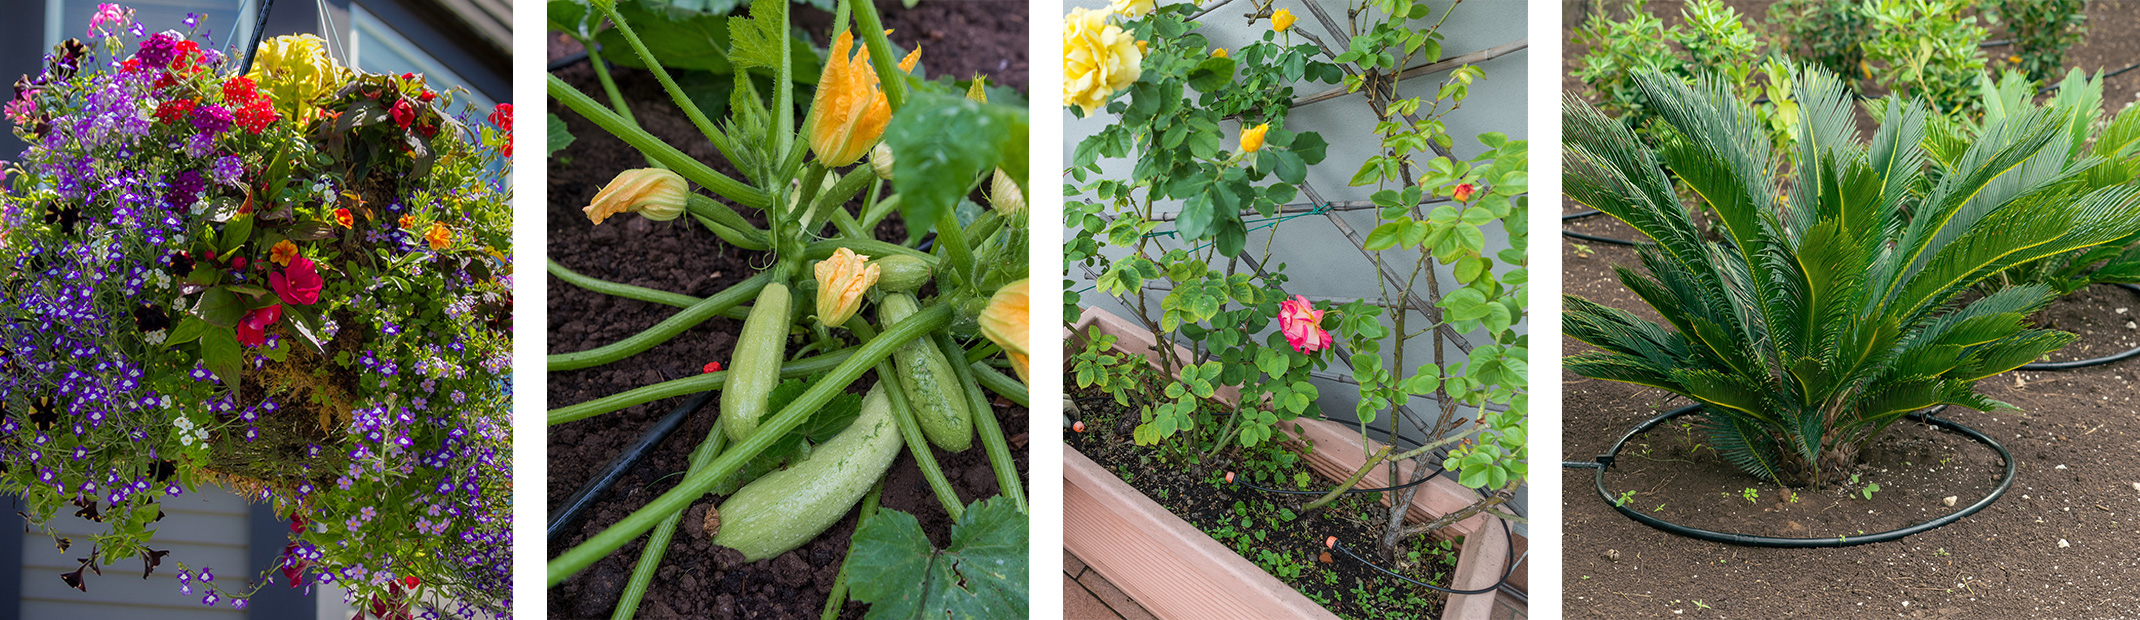 Hanging flower basket, zucchini, potted roses, and palms --all using drip irrigation systems.